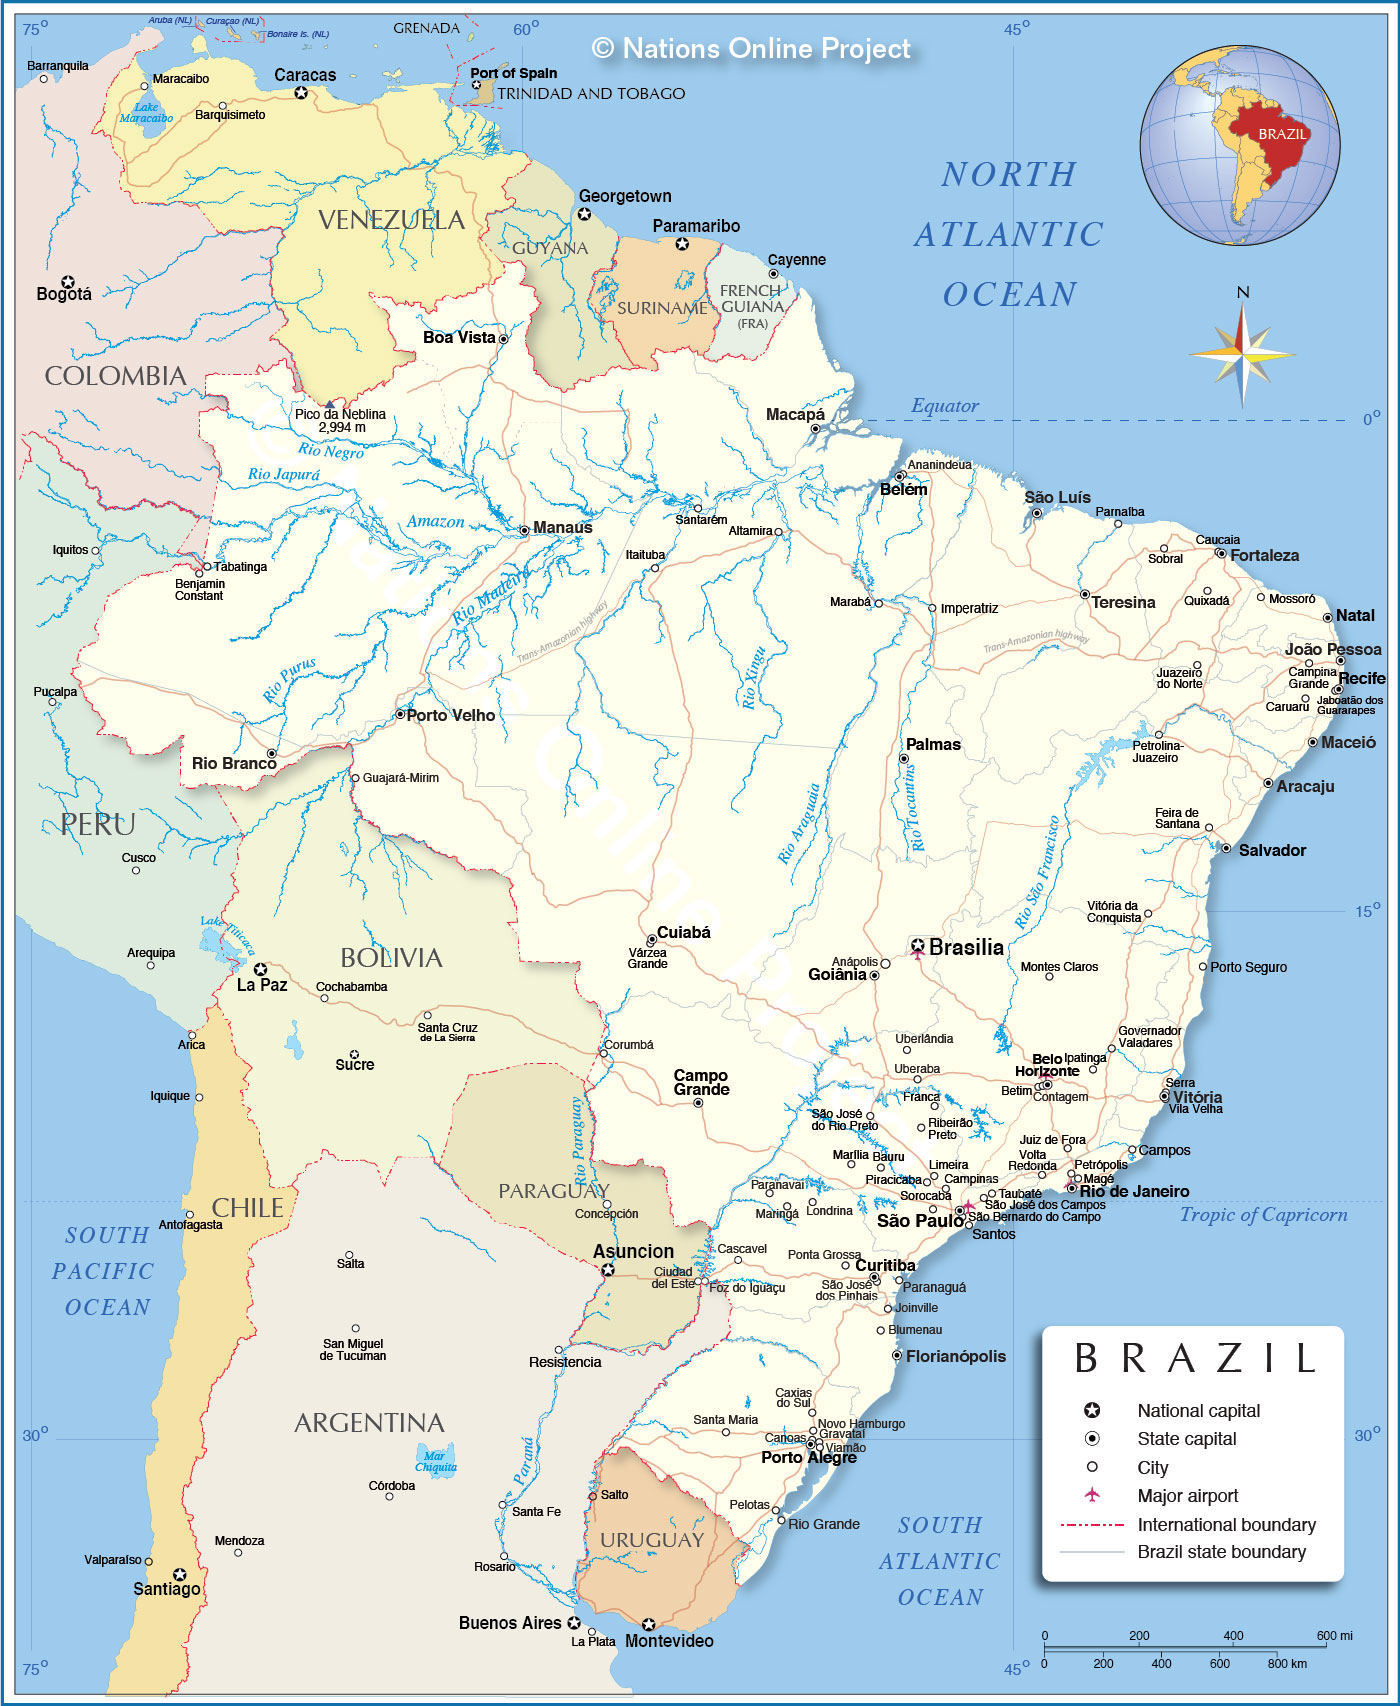 Map of the Brazilian legal  and its nine federal states: Acre